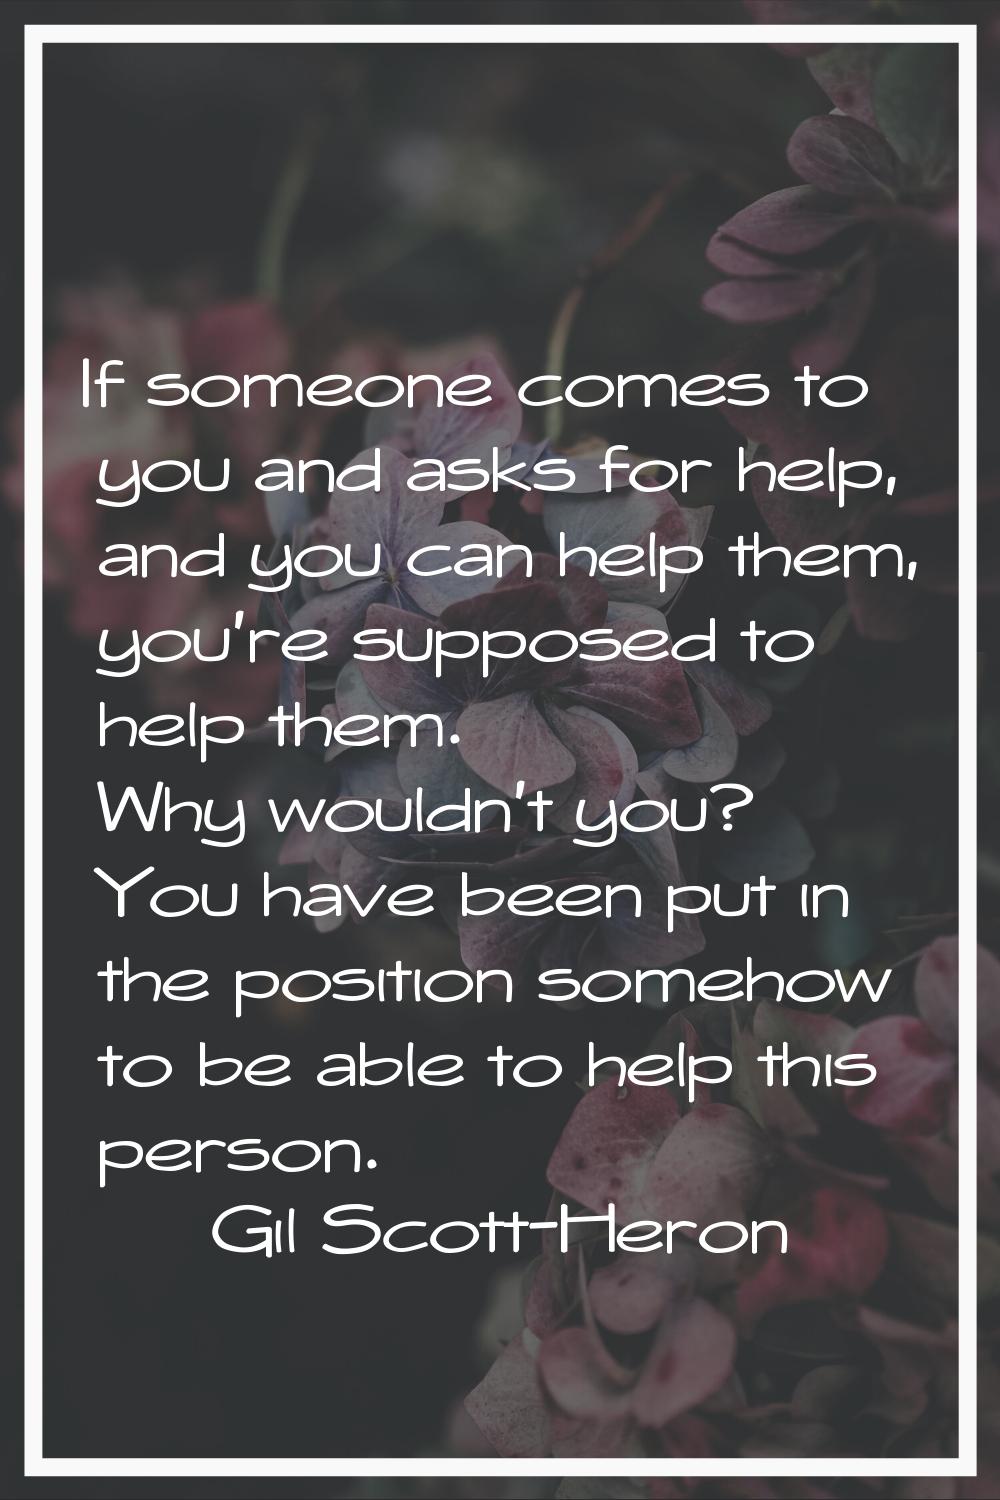 If someone comes to you and asks for help, and you can help them, you're supposed to help them. Why